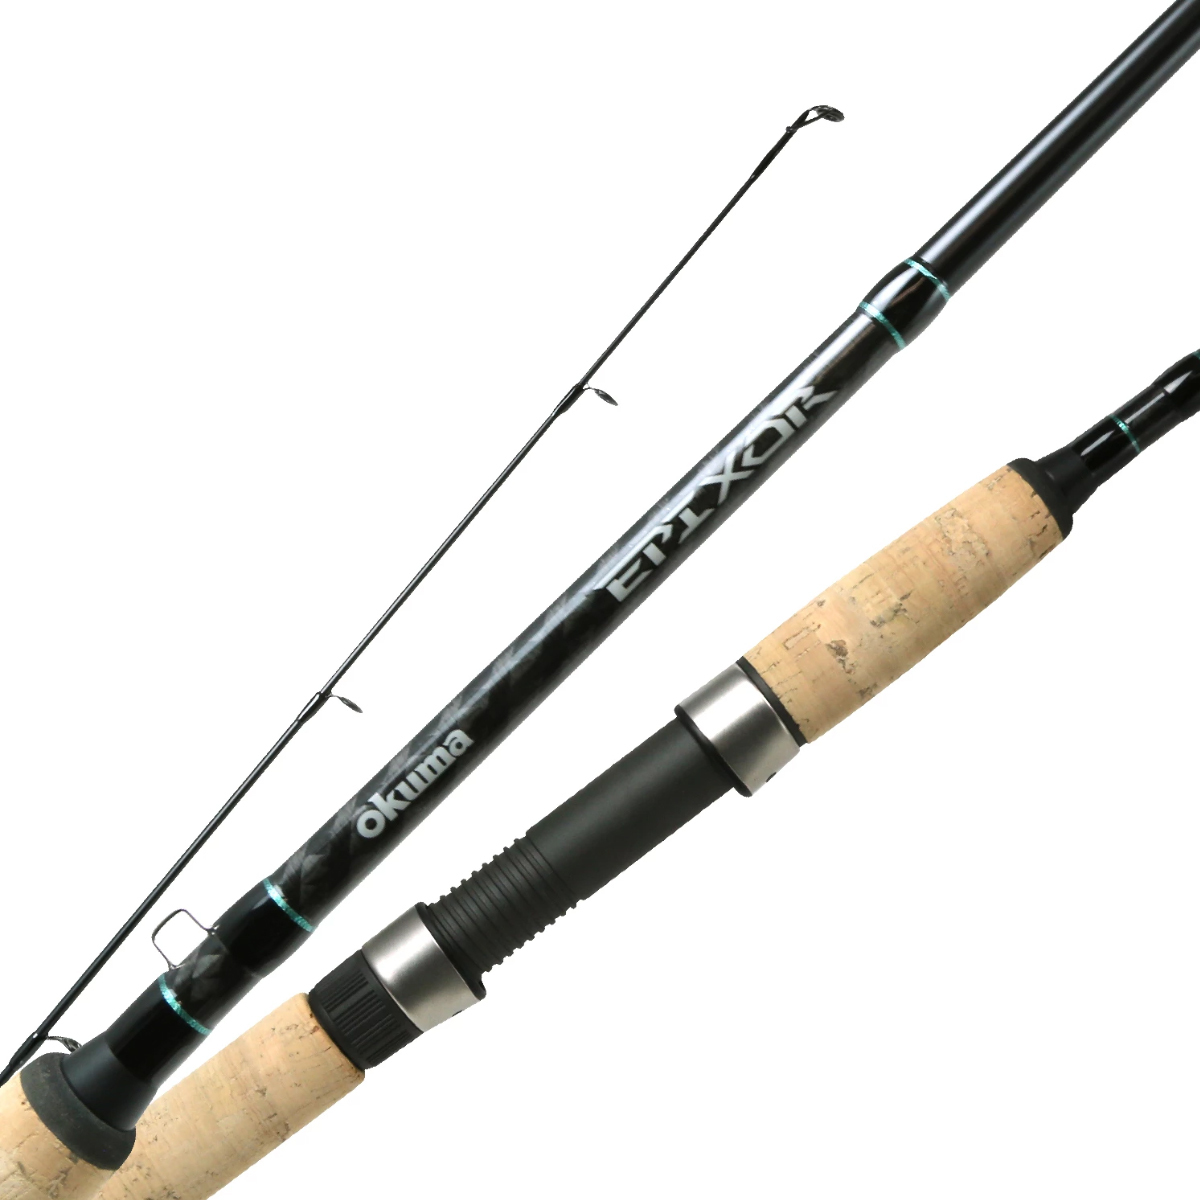 Okuma Epixor Spinning Rod, 1 Piece, Heavy 24-Ton Carbon Rod, Blanks Full  Cork Fore And Rear Grips with Fuji Trigger Reel Seat